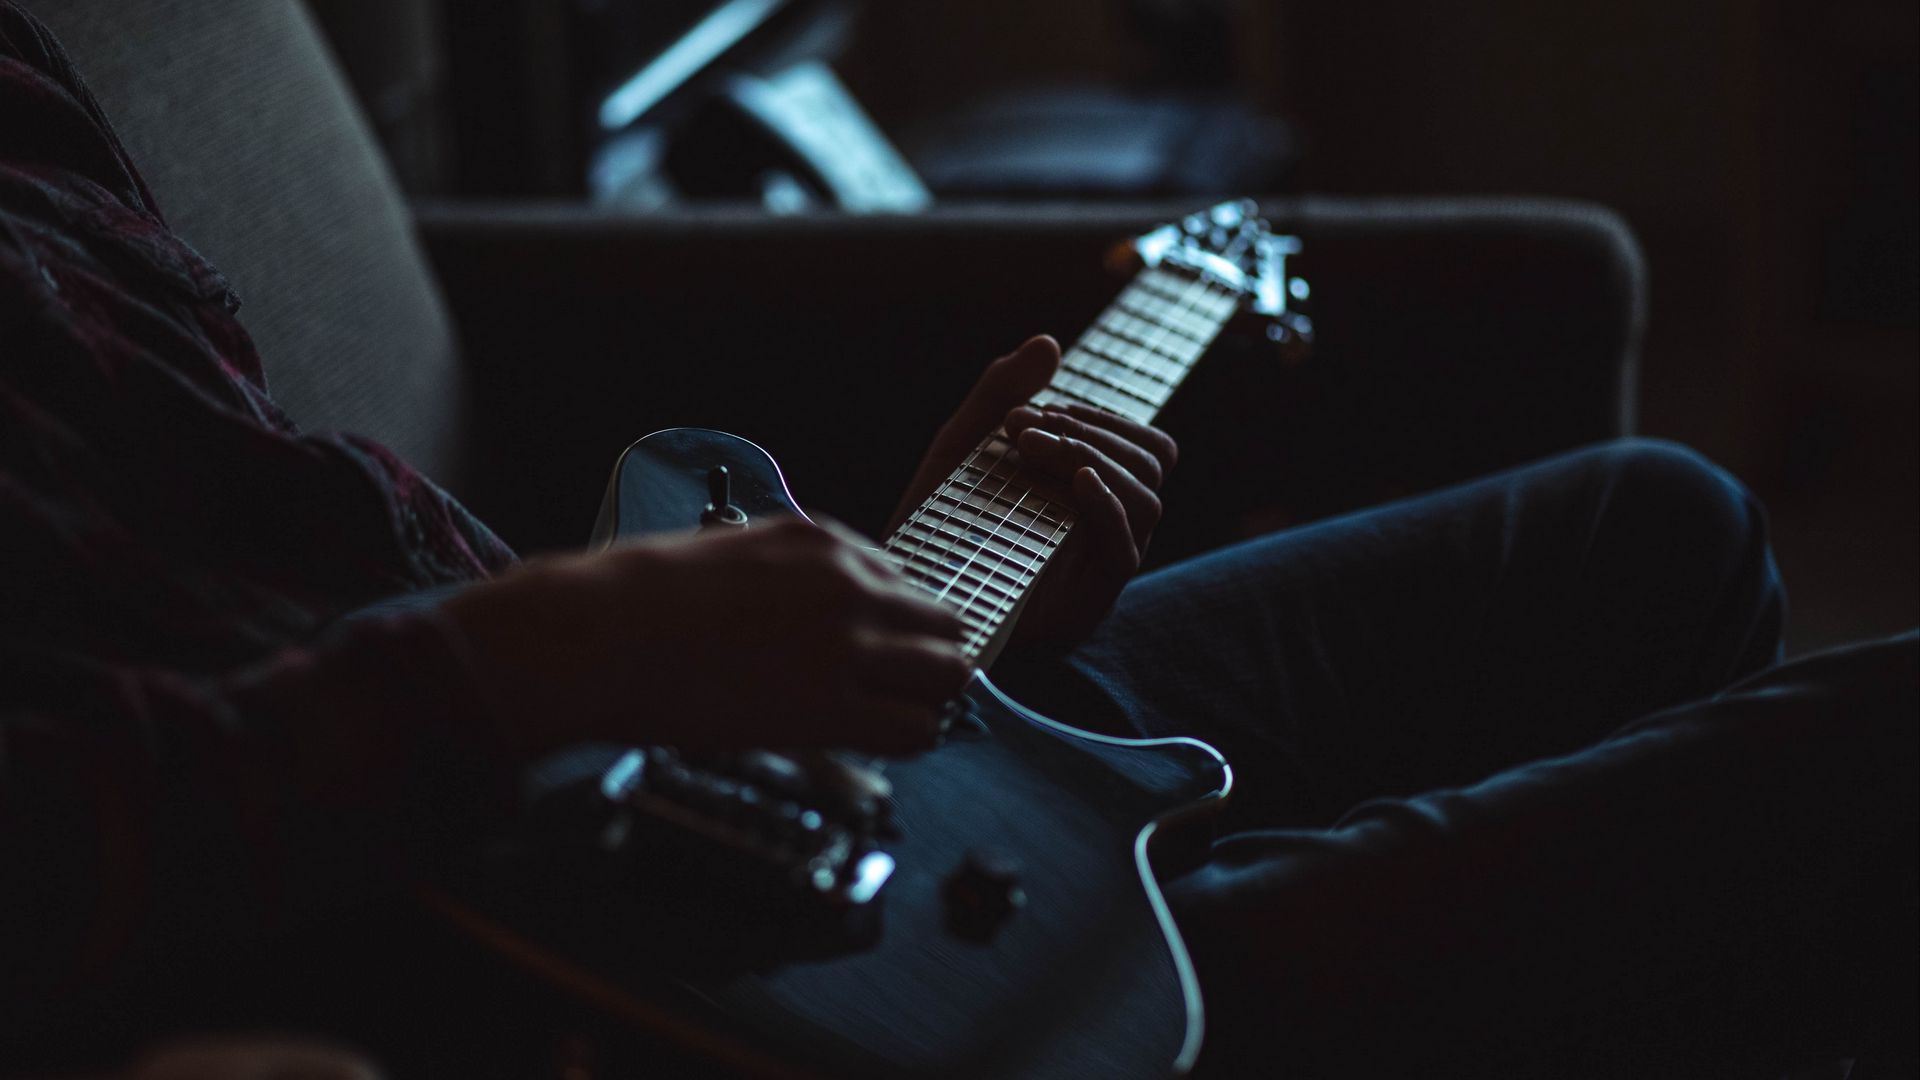 500 Bass Guitar Pictures HD  Download Free Images on Unsplash